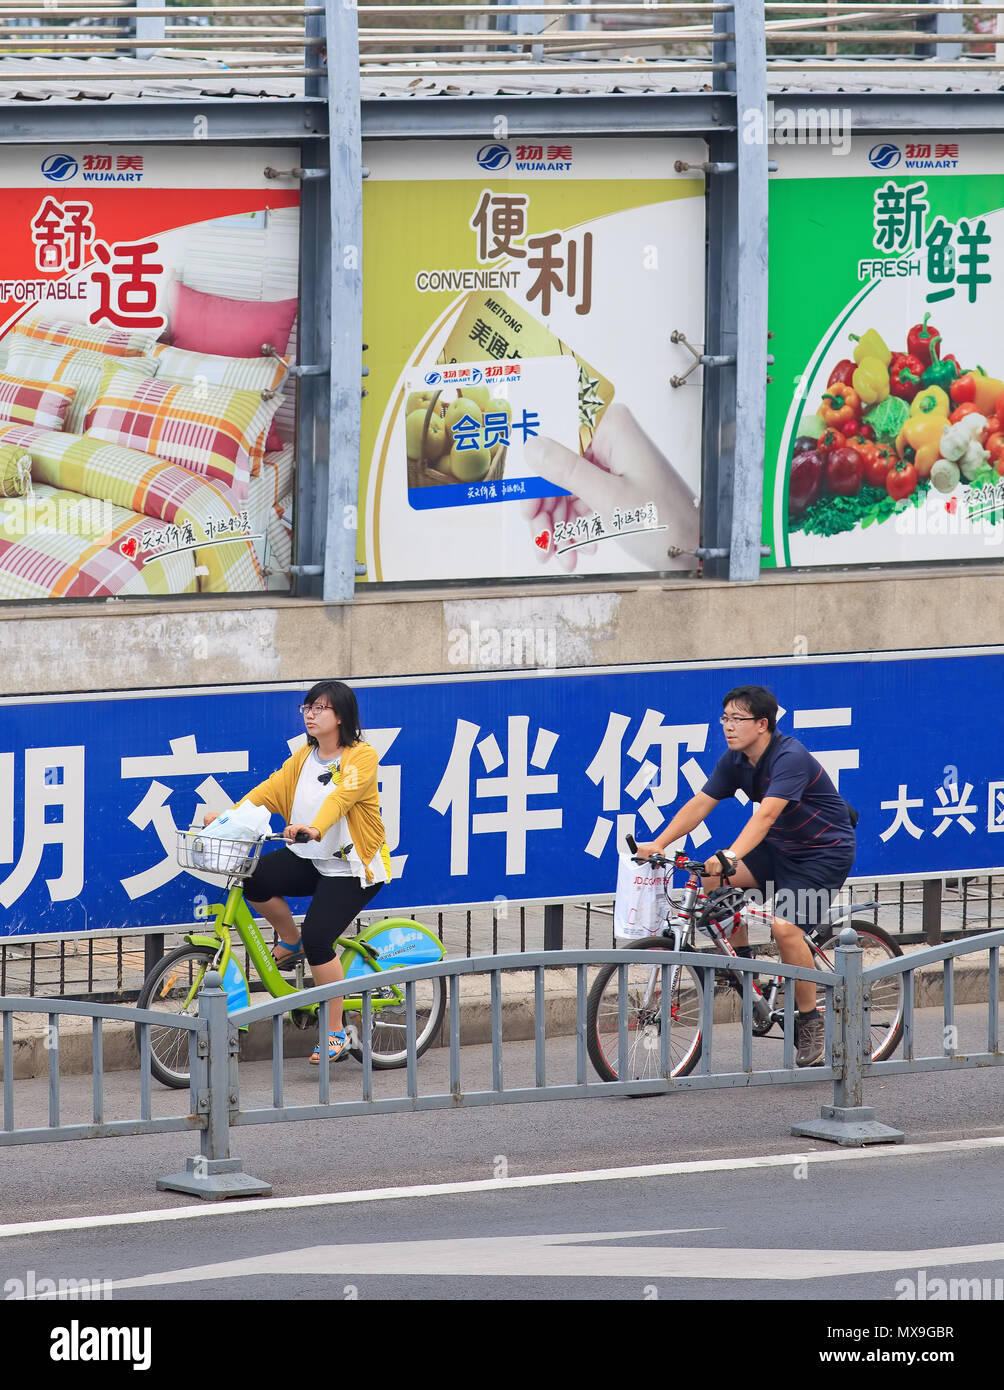 BEIJING-JULY 27, 2015. Large billboards near cycle lane in city center. Outdoor advertising became China’s third largest medium after TV and print. Stock Photo